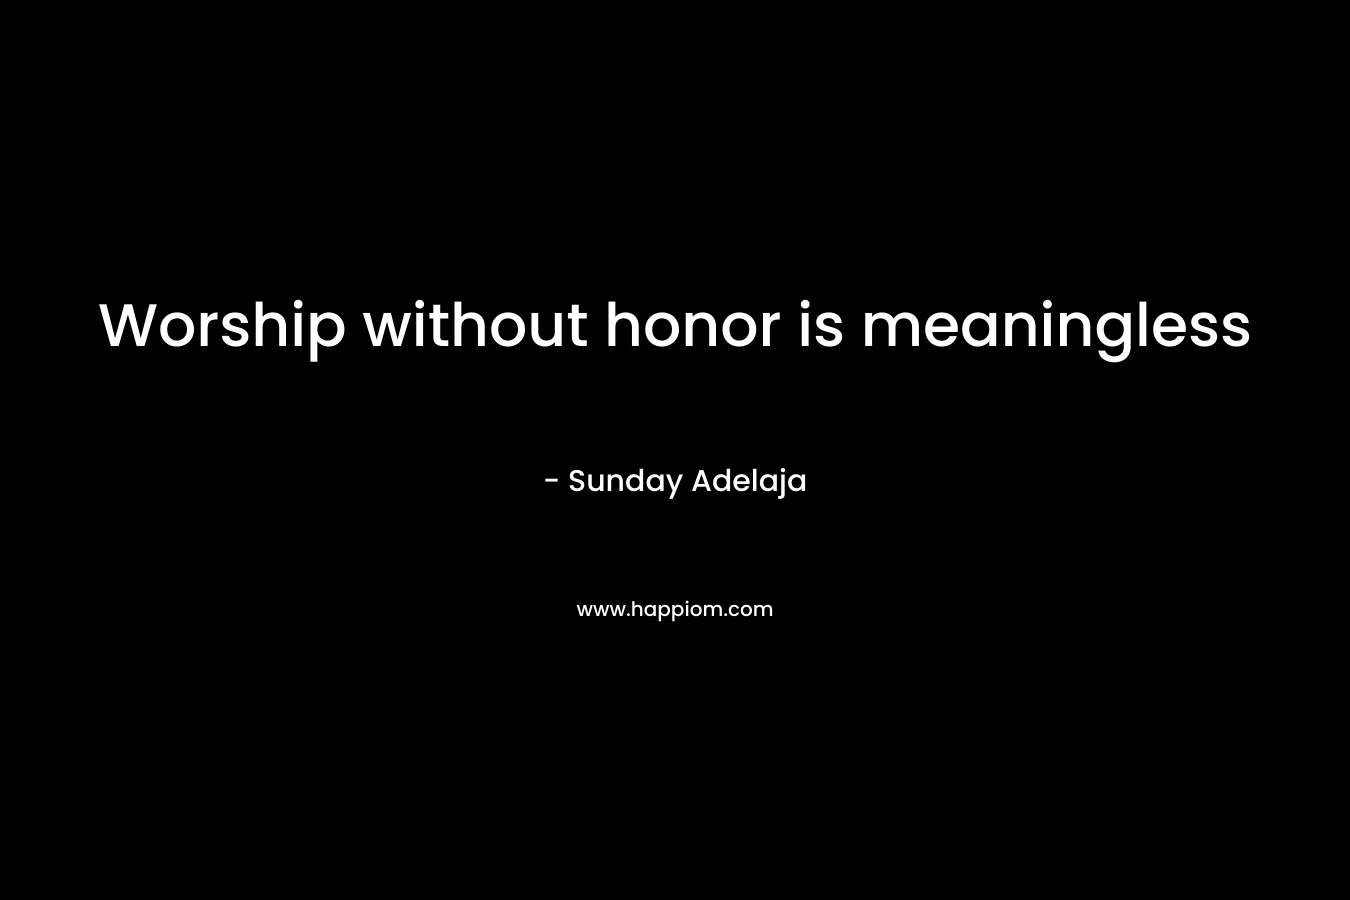 Worship without honor is meaningless